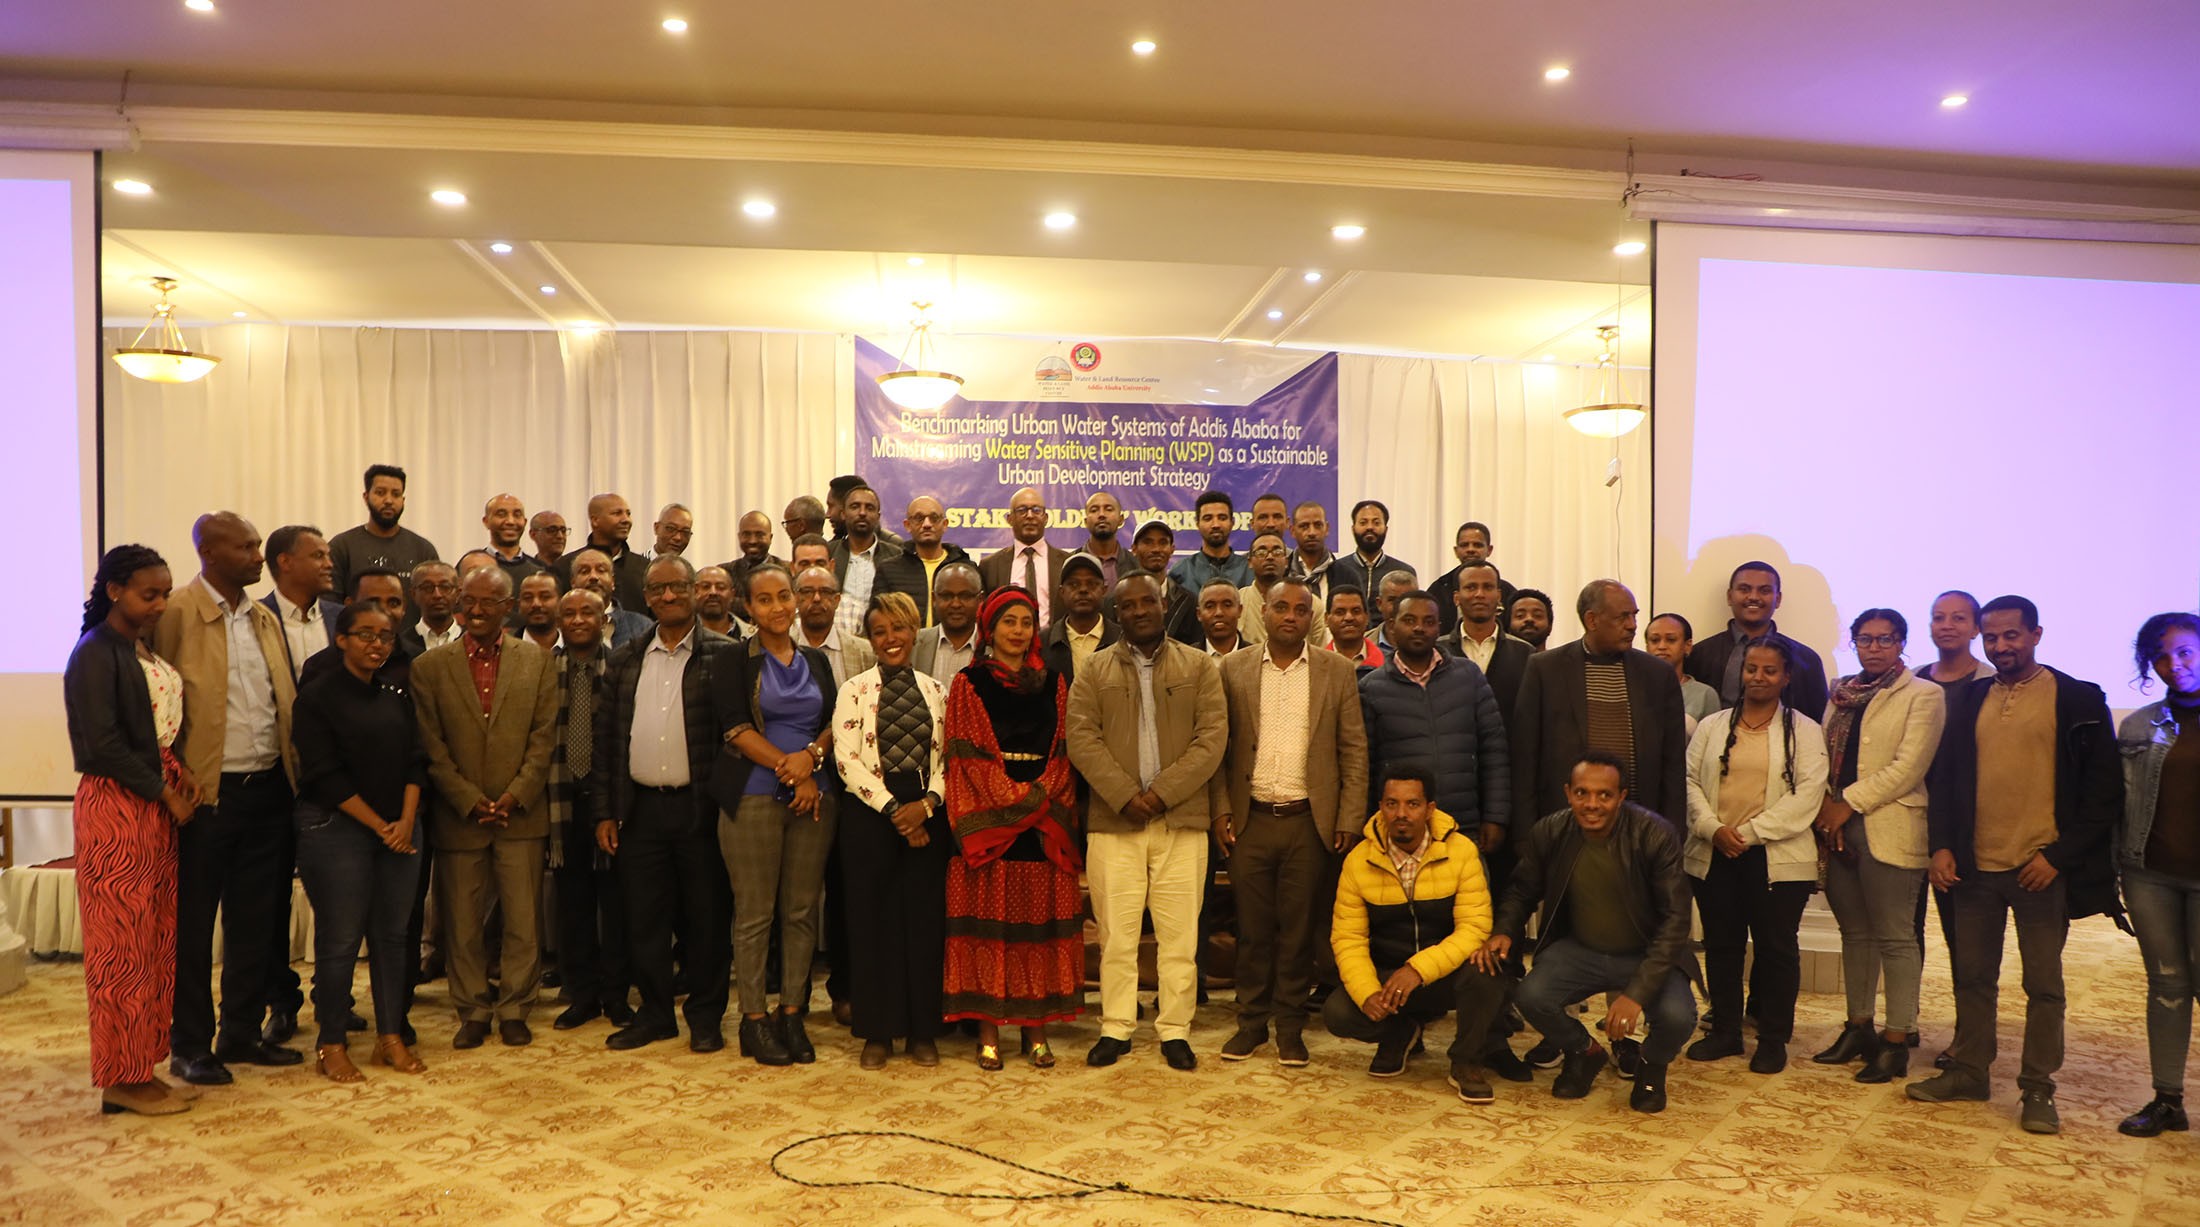 A large group of around 50 people stand and crouch together in several rows, smiling at the camera, with a banner behind with the text 'Benchmarking urban water systems of Addis Ababa'